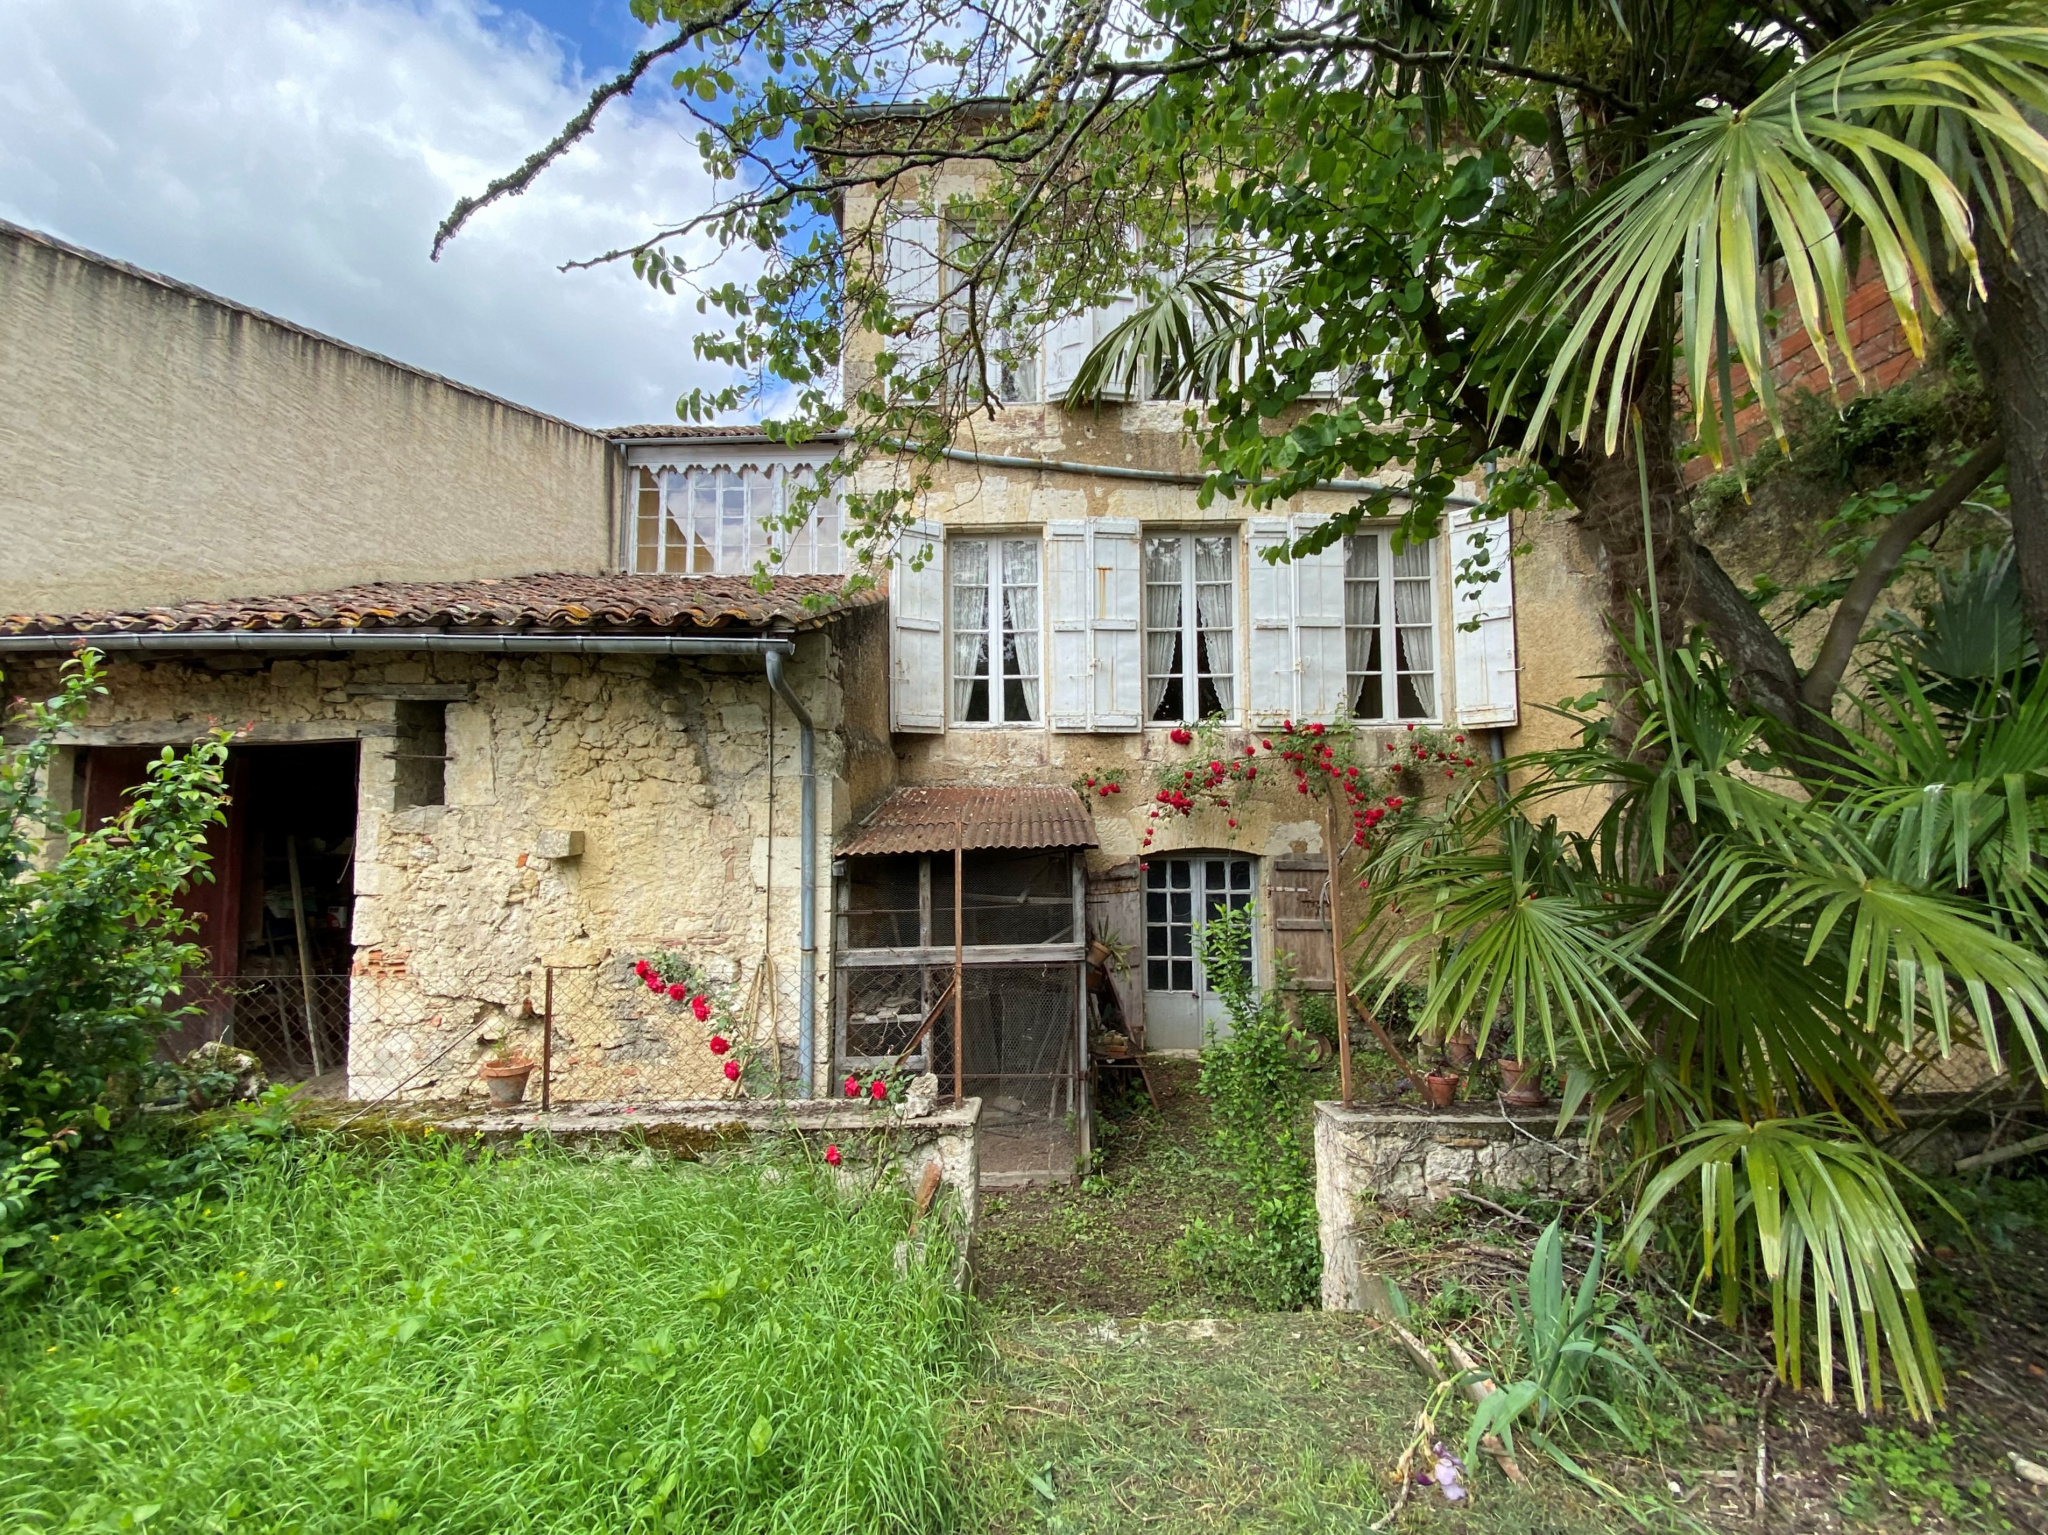 Large bourgeois house, ideally located, with private garden and garage in the heart of Lectoure